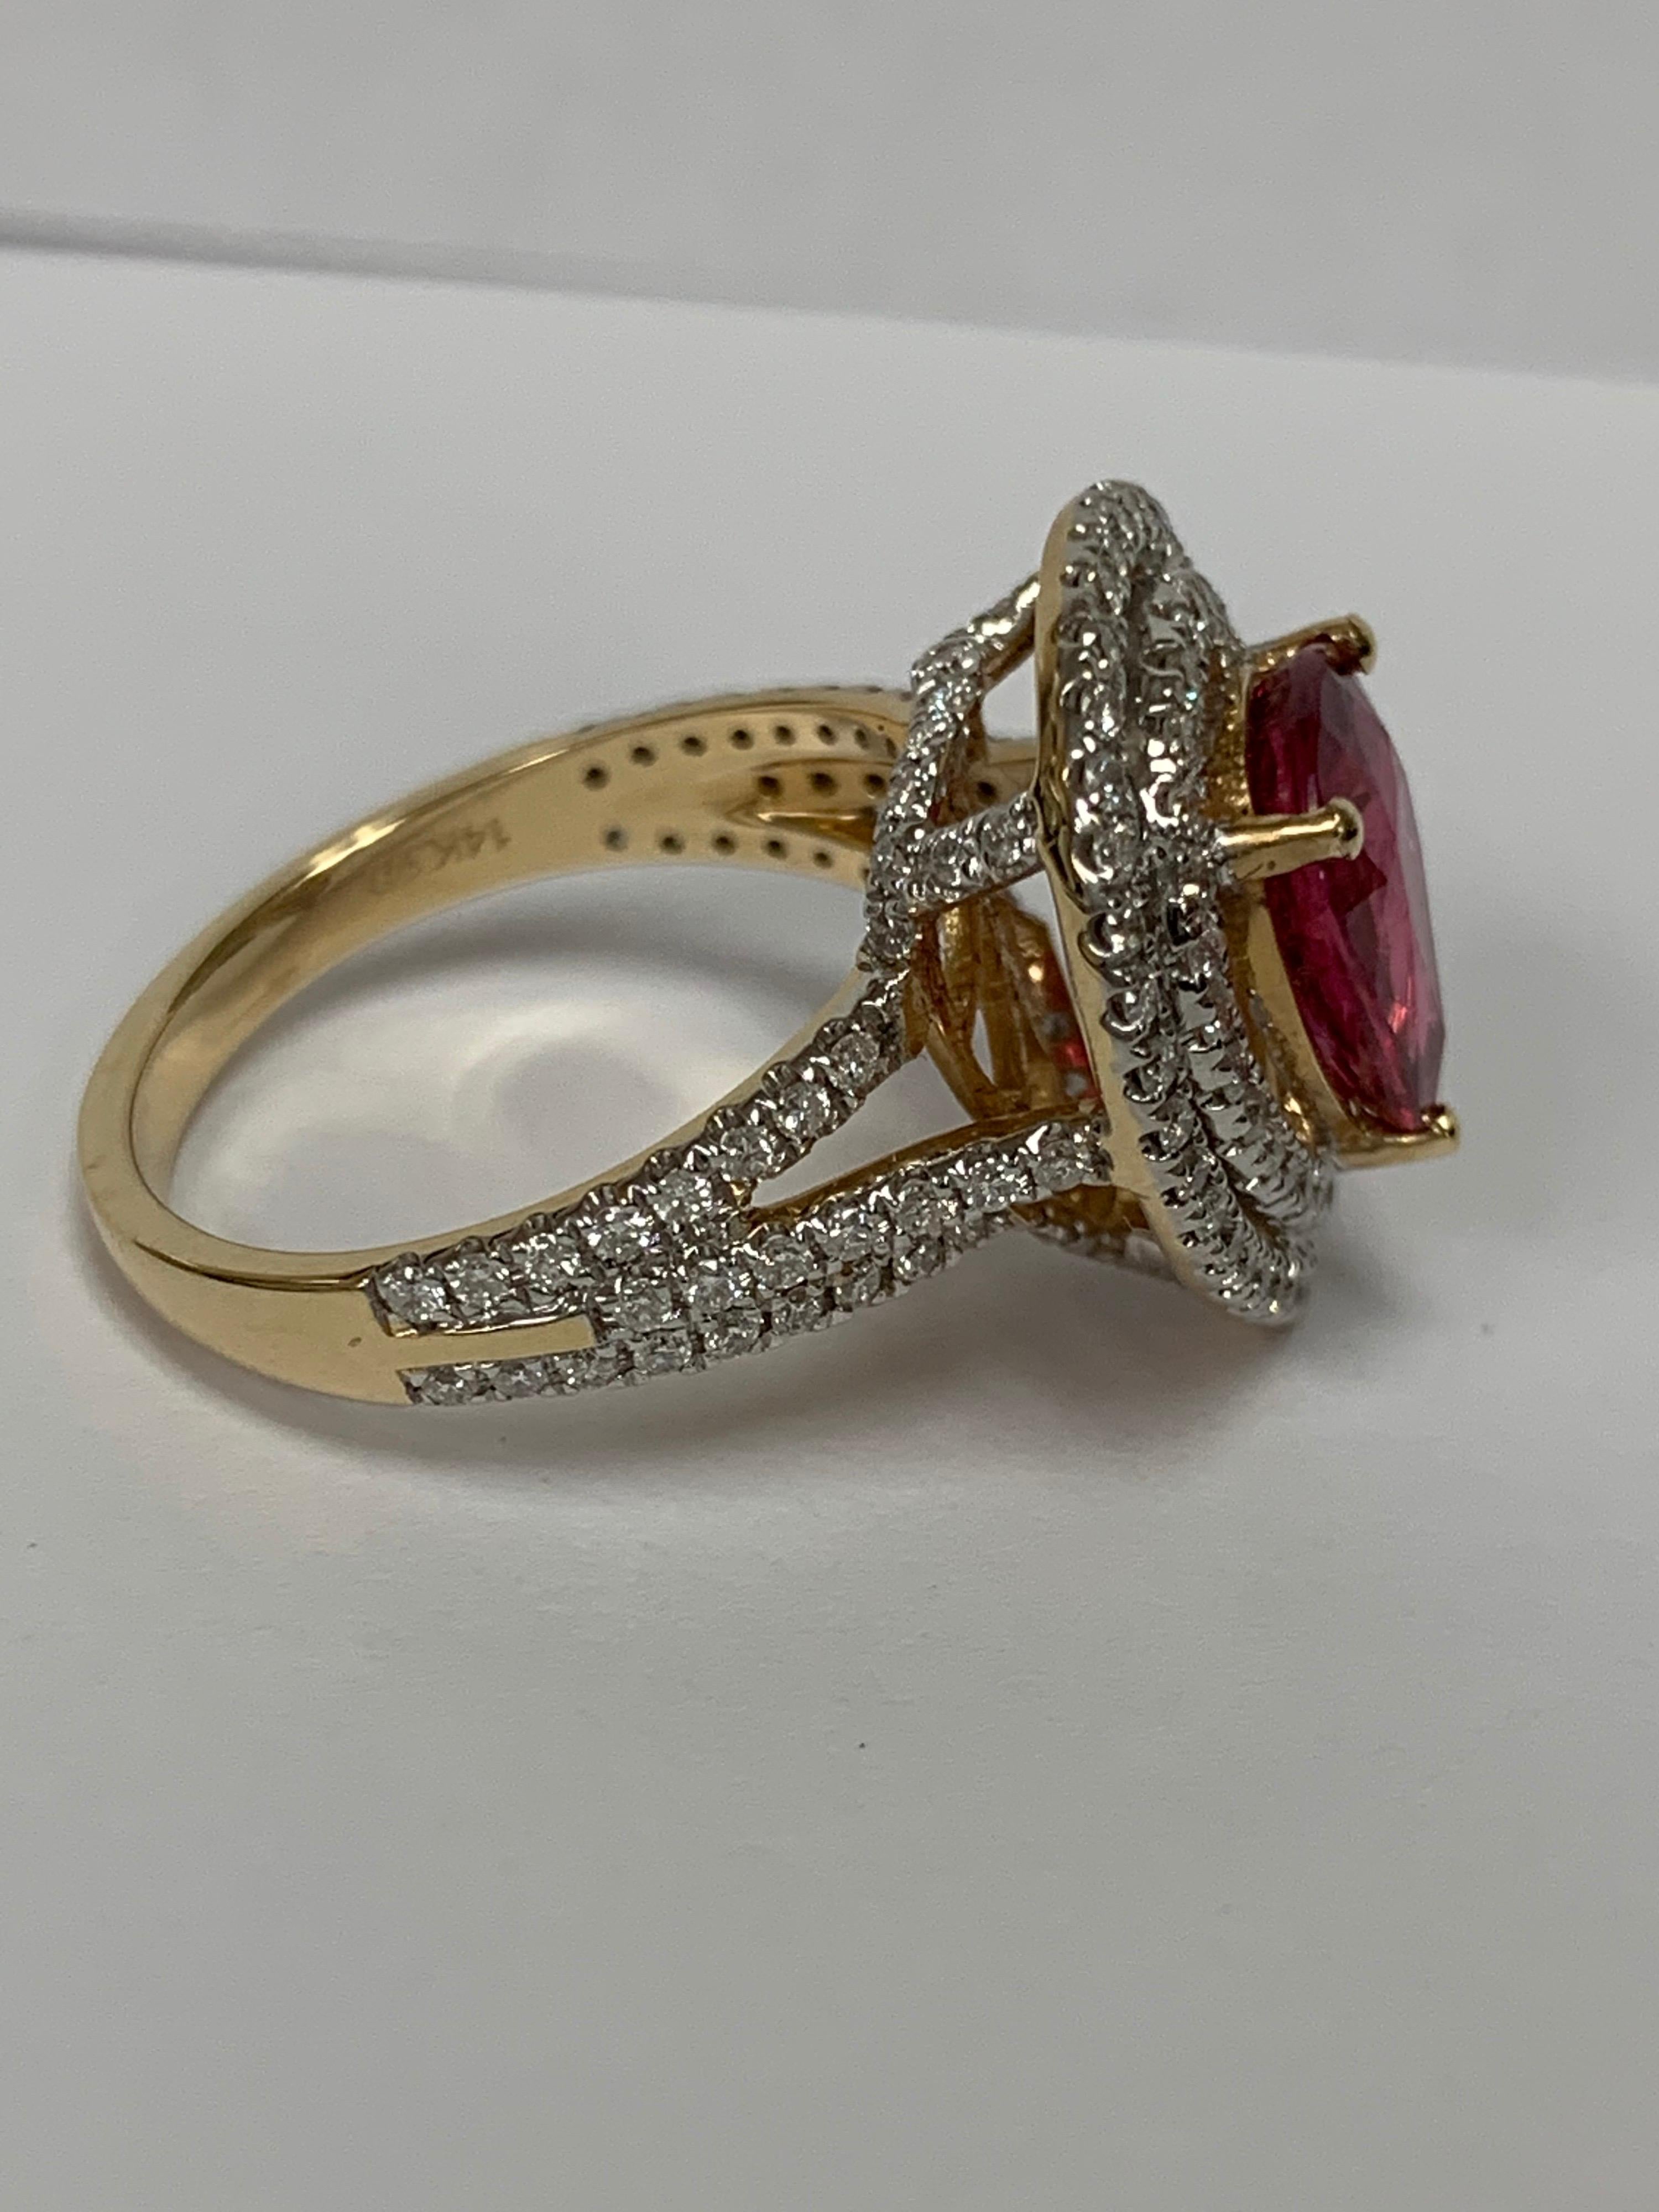 Pear shape Natural Ruby set in 14 Karat yellow gold is one of a kind Ring. The Ruby is 2.55 Carat and White Round Diamonds are 0.78 Carat . Currently Size of the Ring is 7 and can be resized if needed.